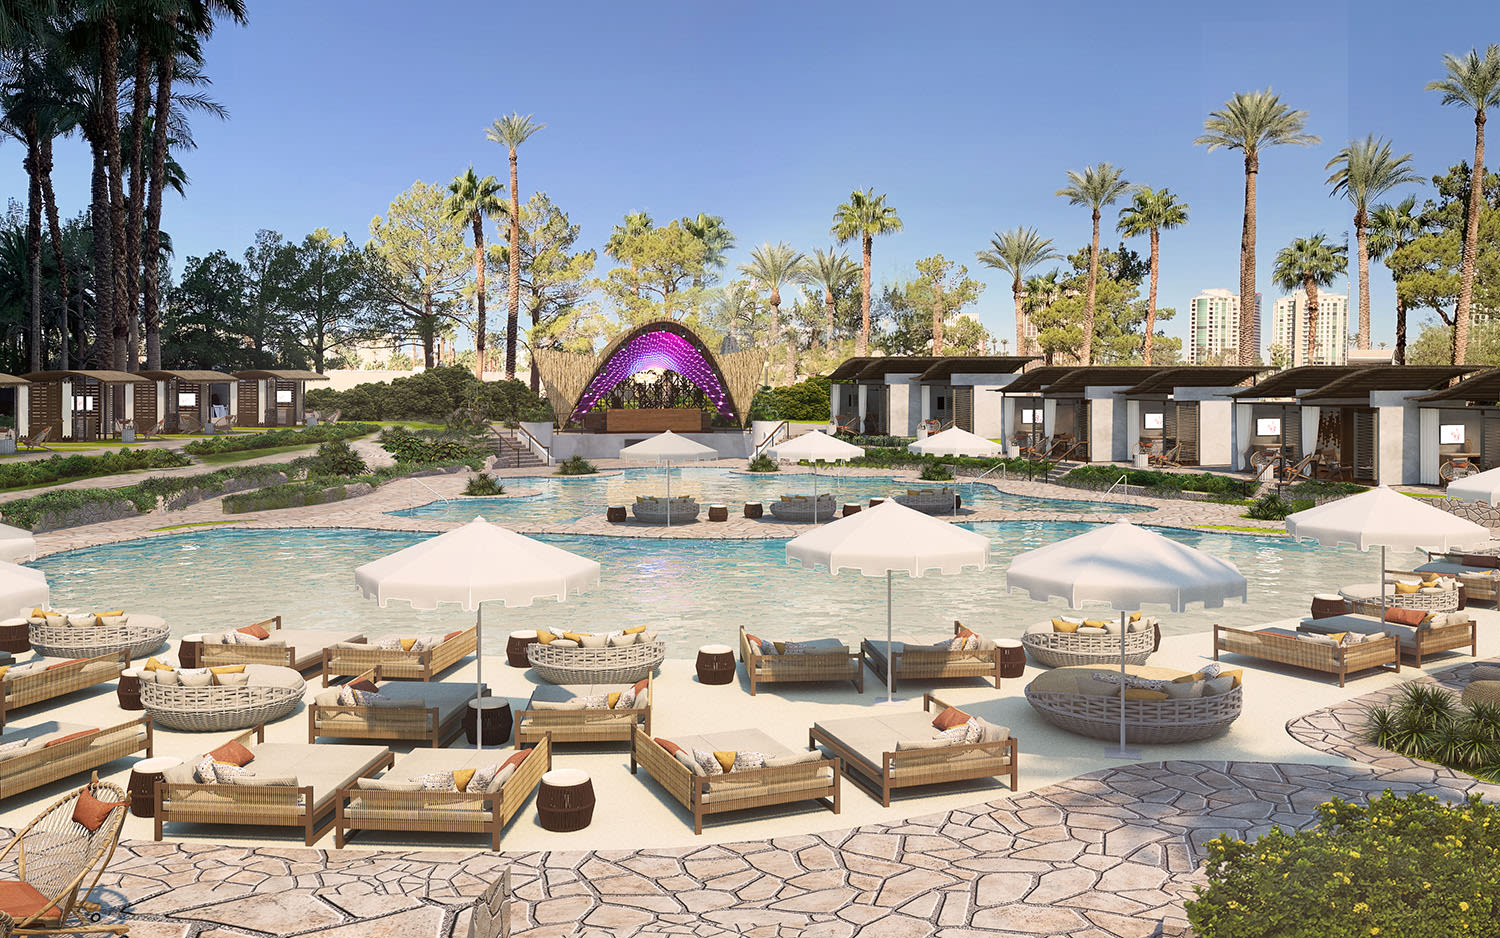 REPORT: These are the most picturesque pools in Las Vegas